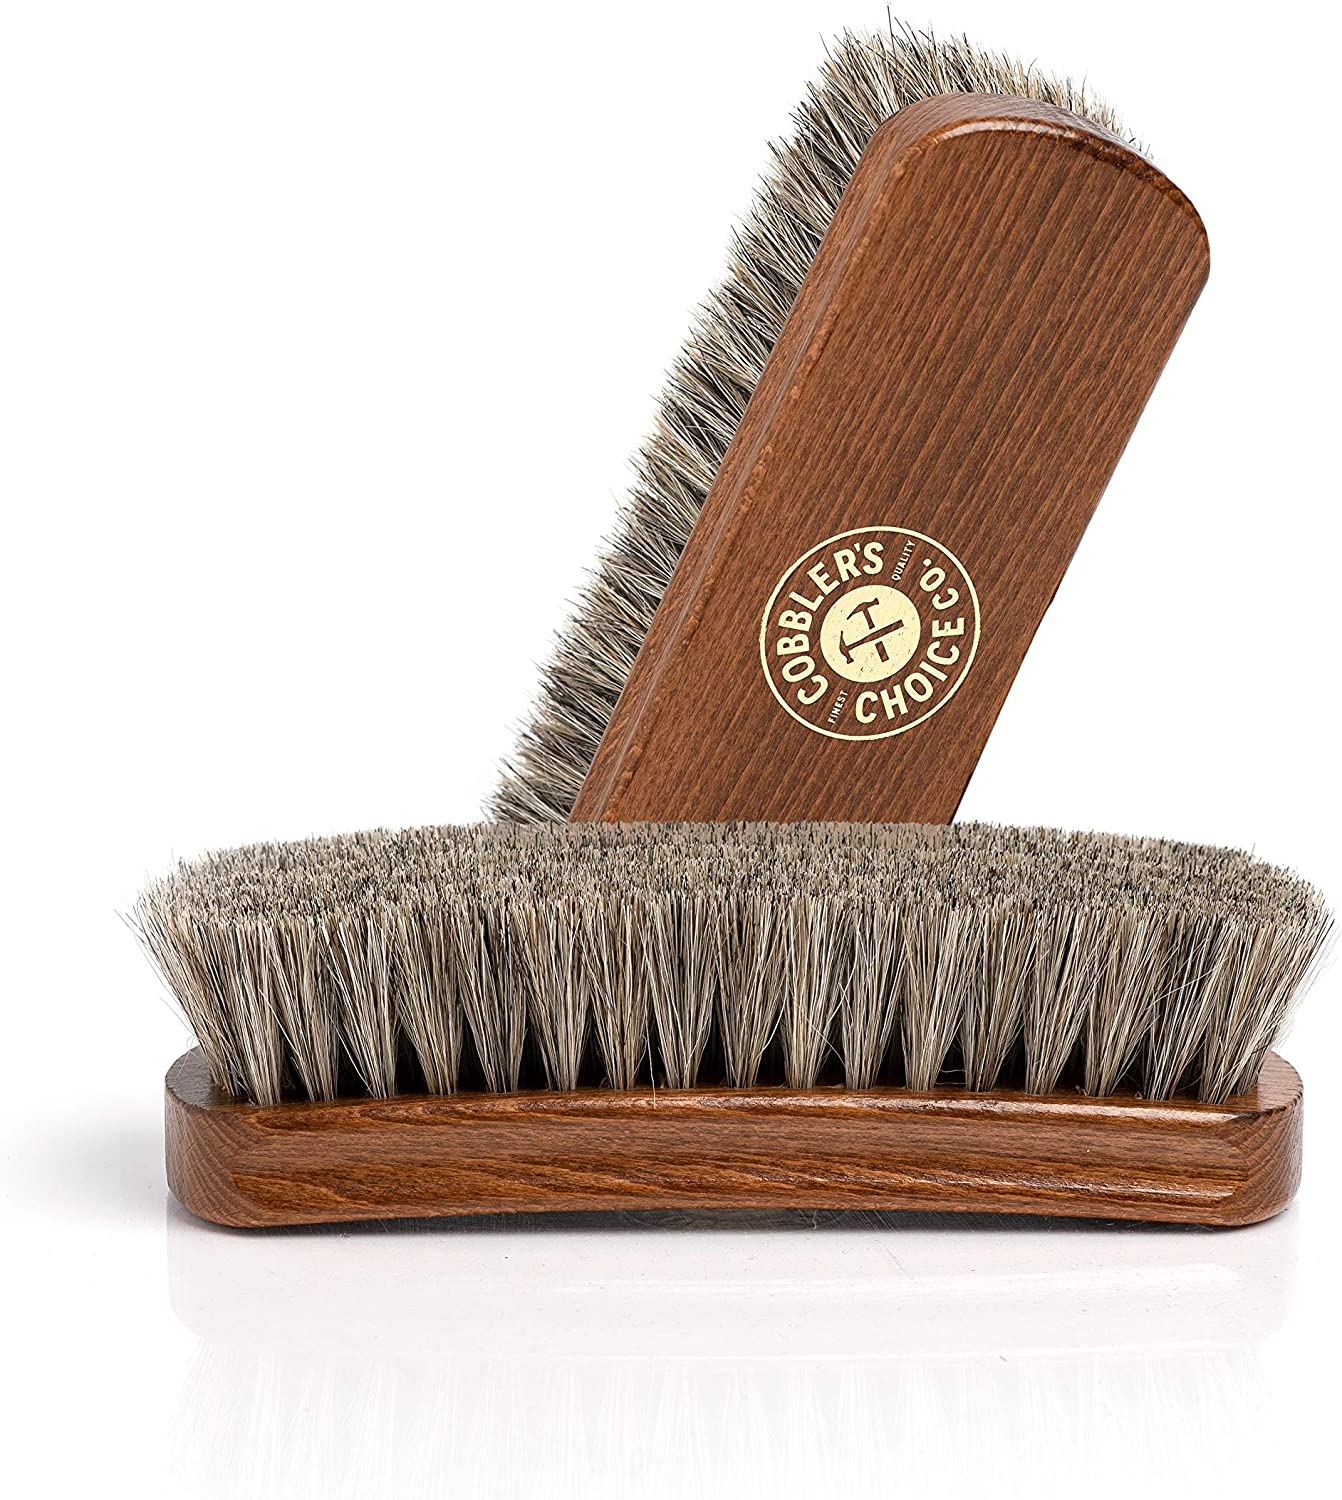 Cobbler’s Choice Co. Concave Wood Handle Horsehair Brush